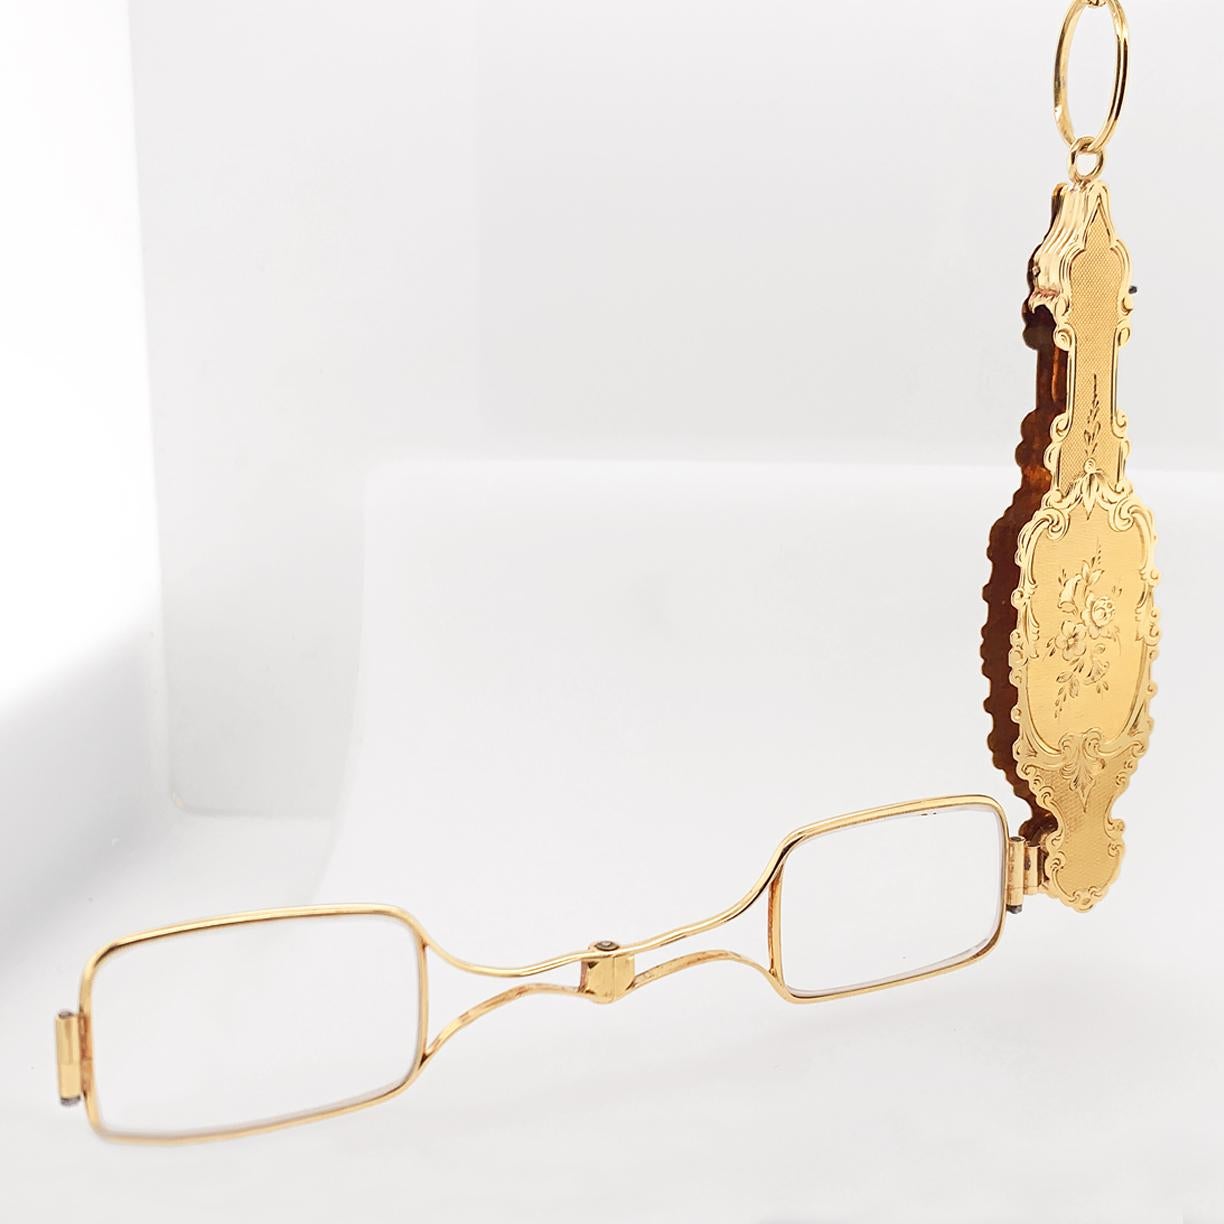 Antique French Gold Lorgnette 1